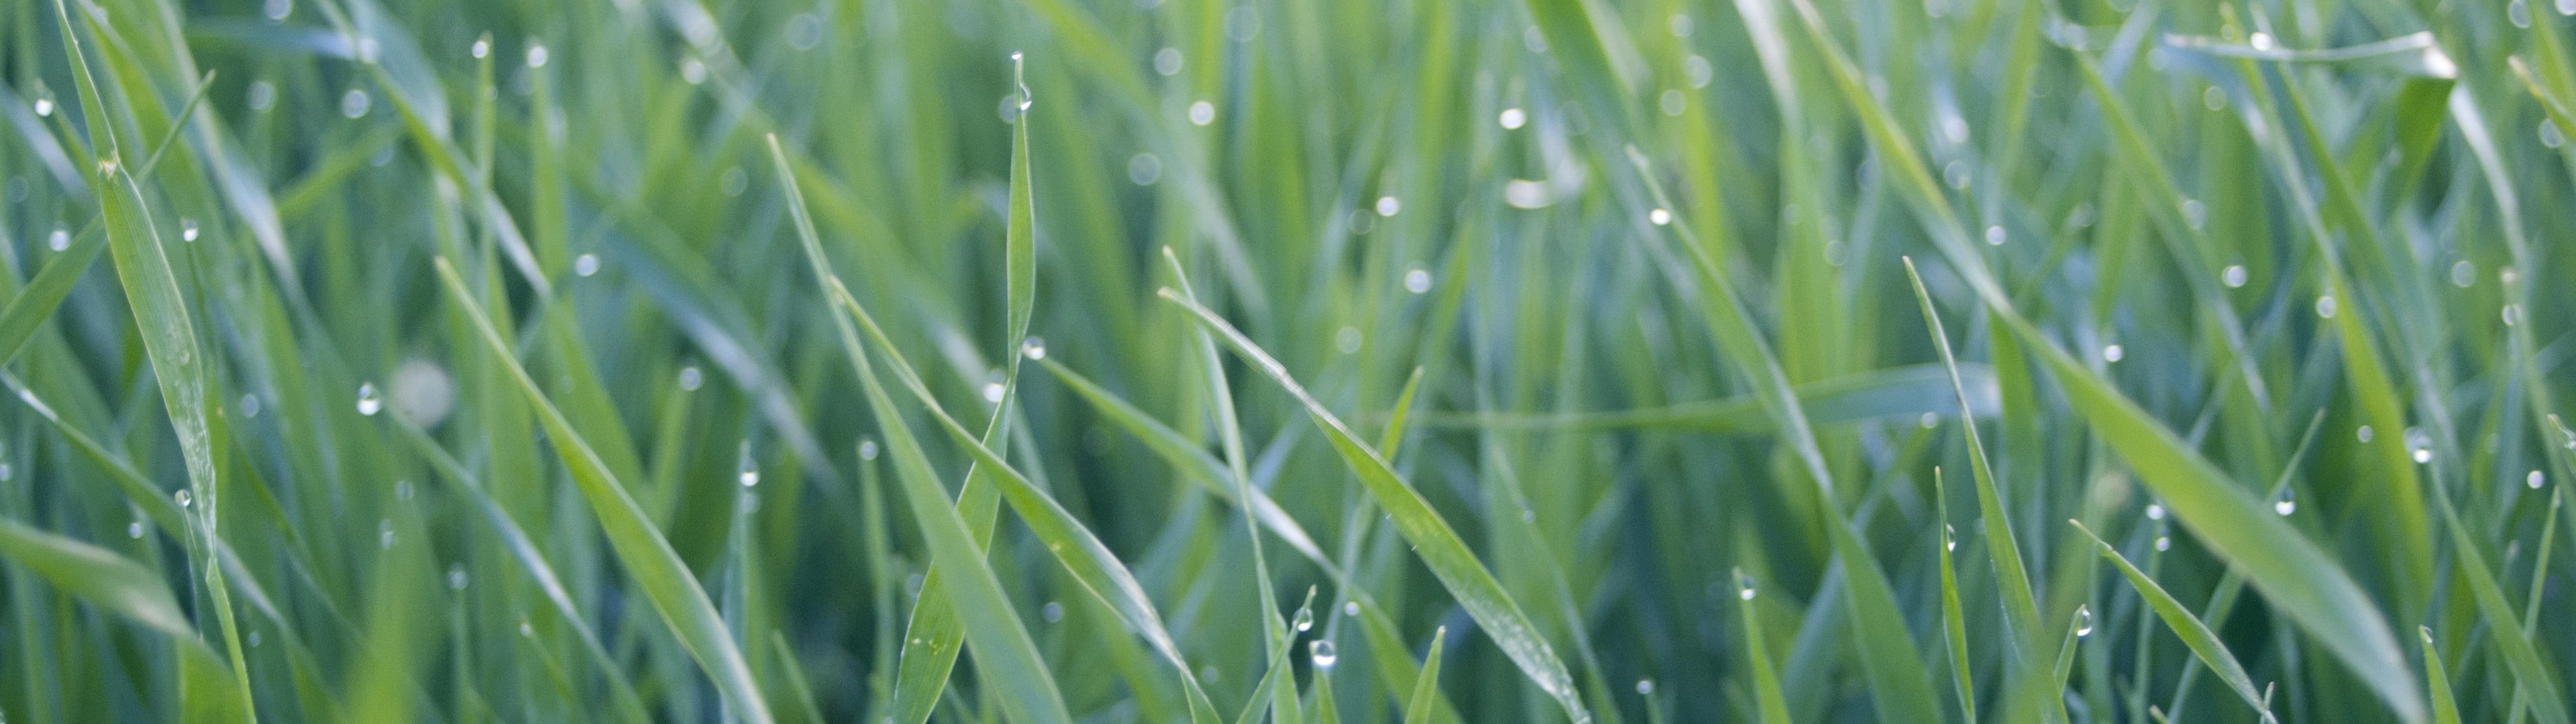 selective focus photography of dew drop on green grass, water drops